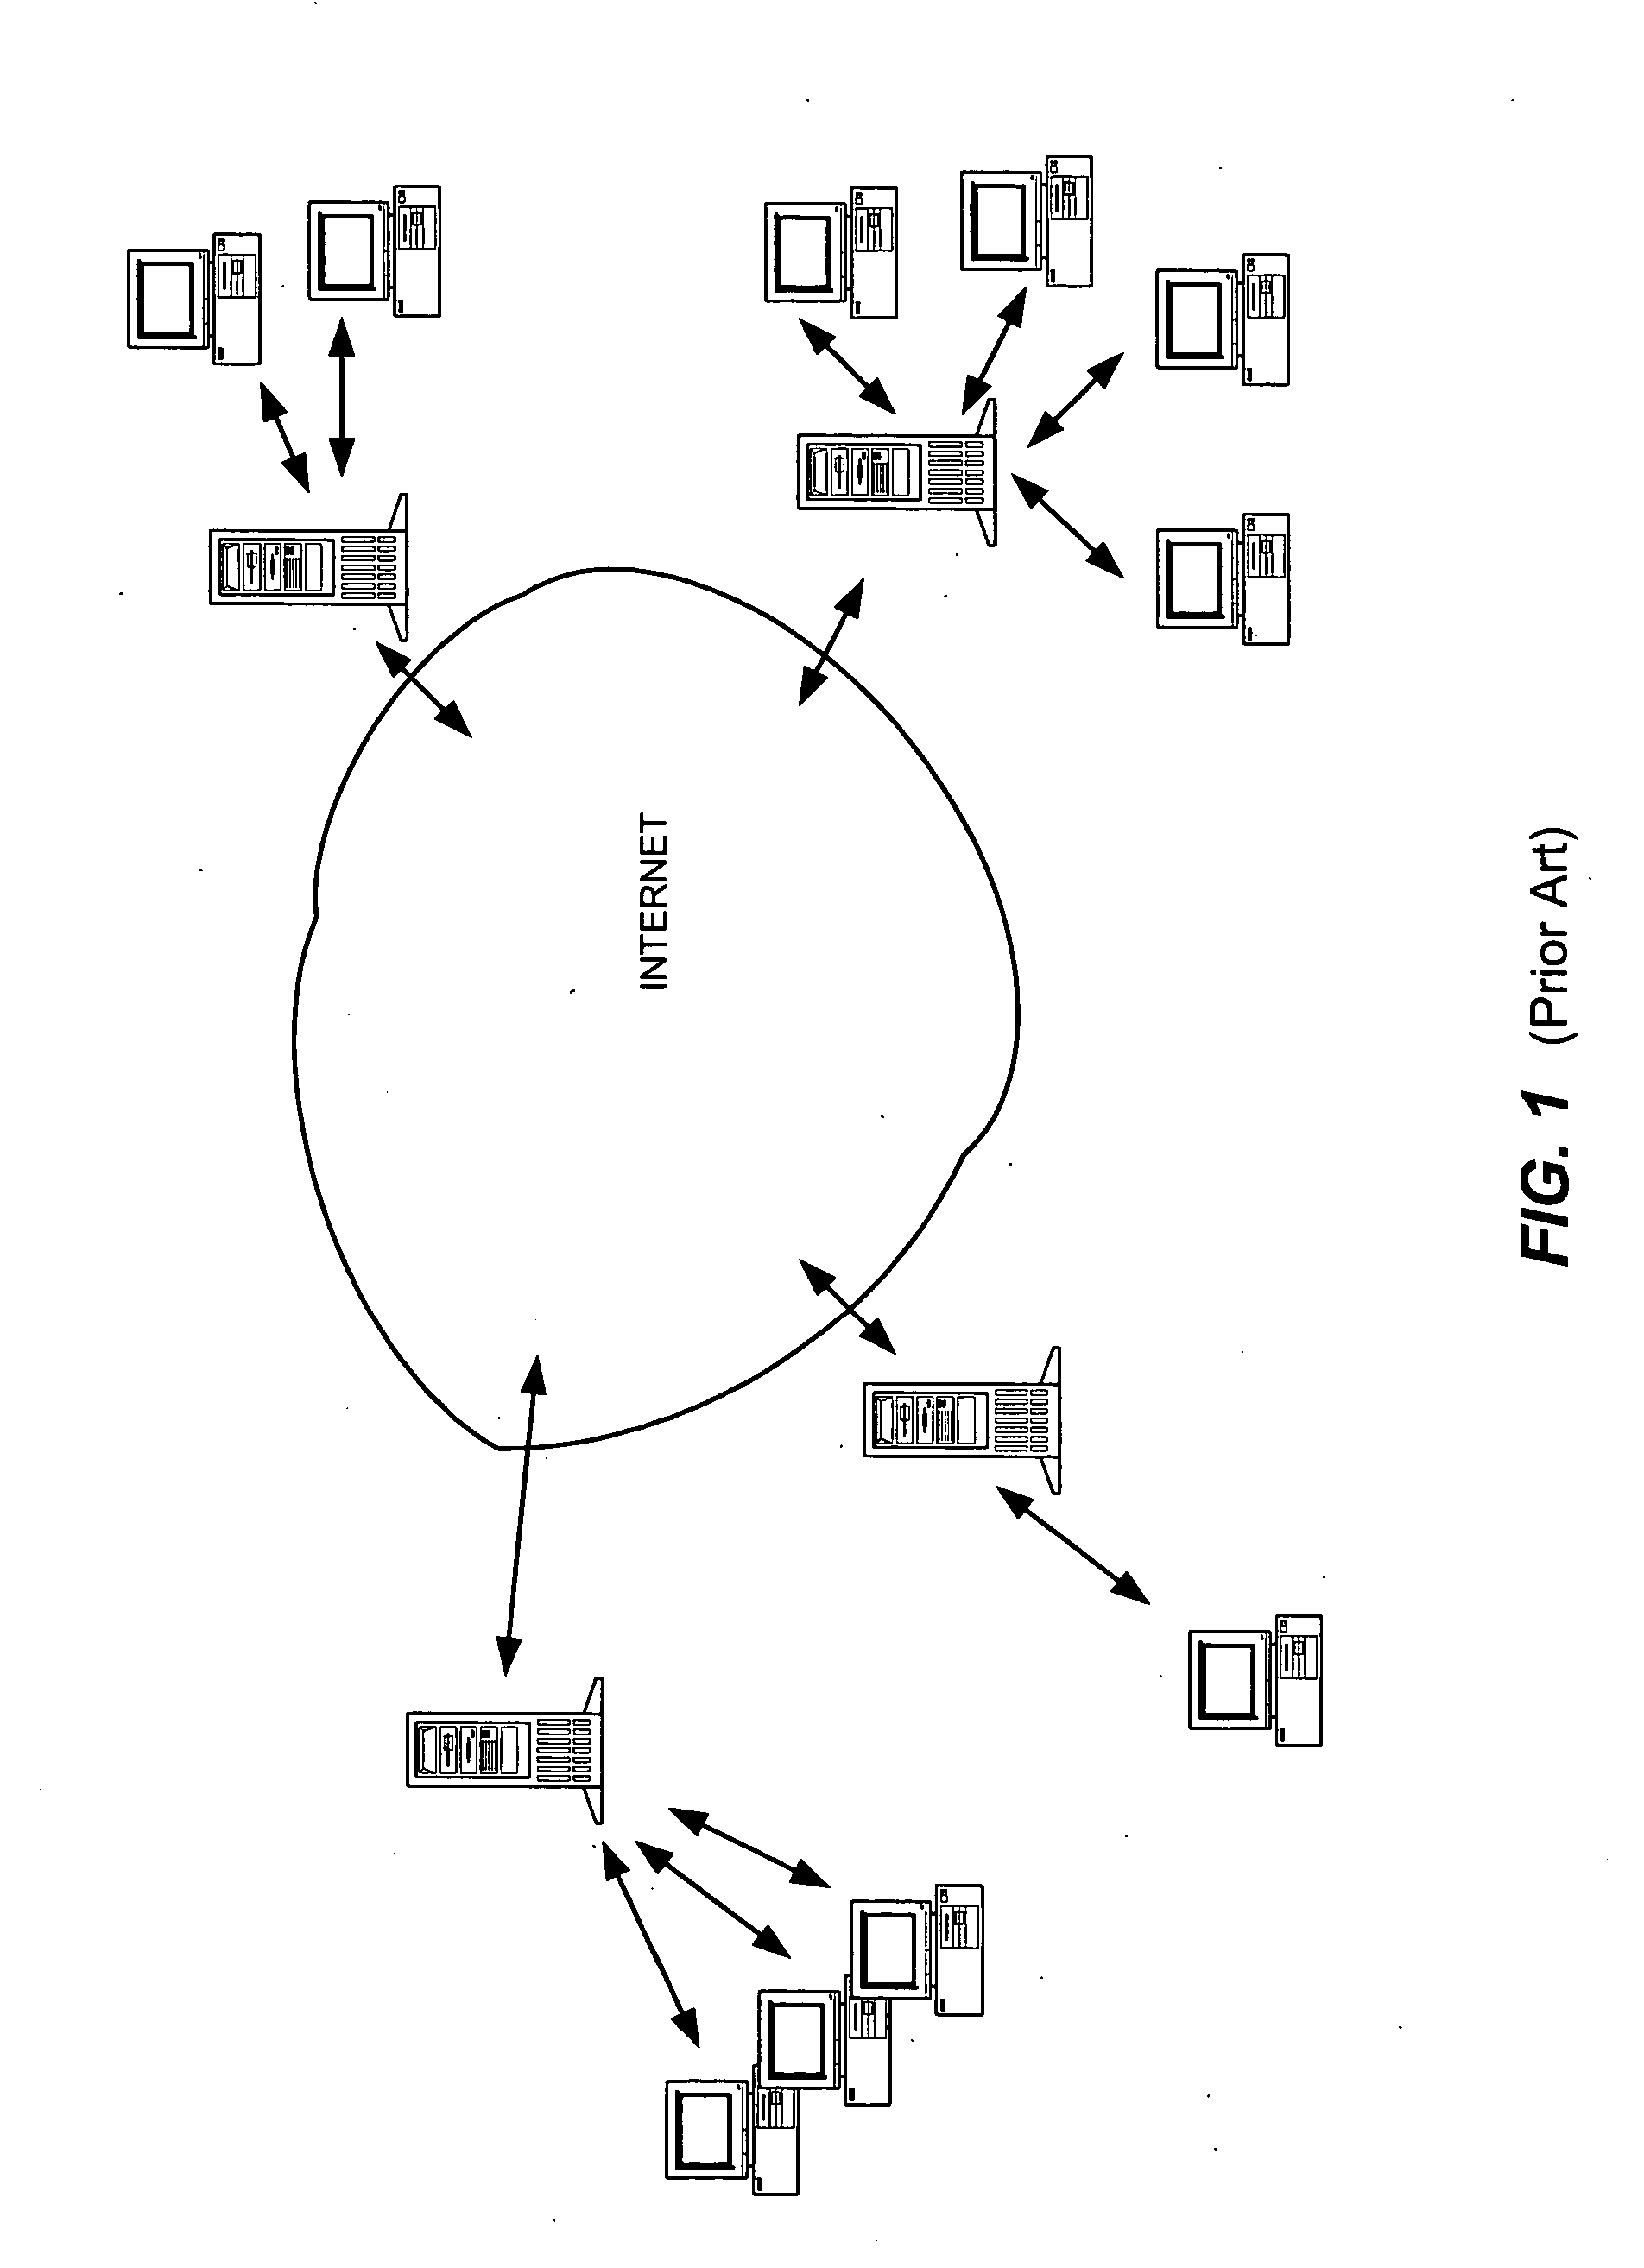 System for determining degrees of similarity in email message information